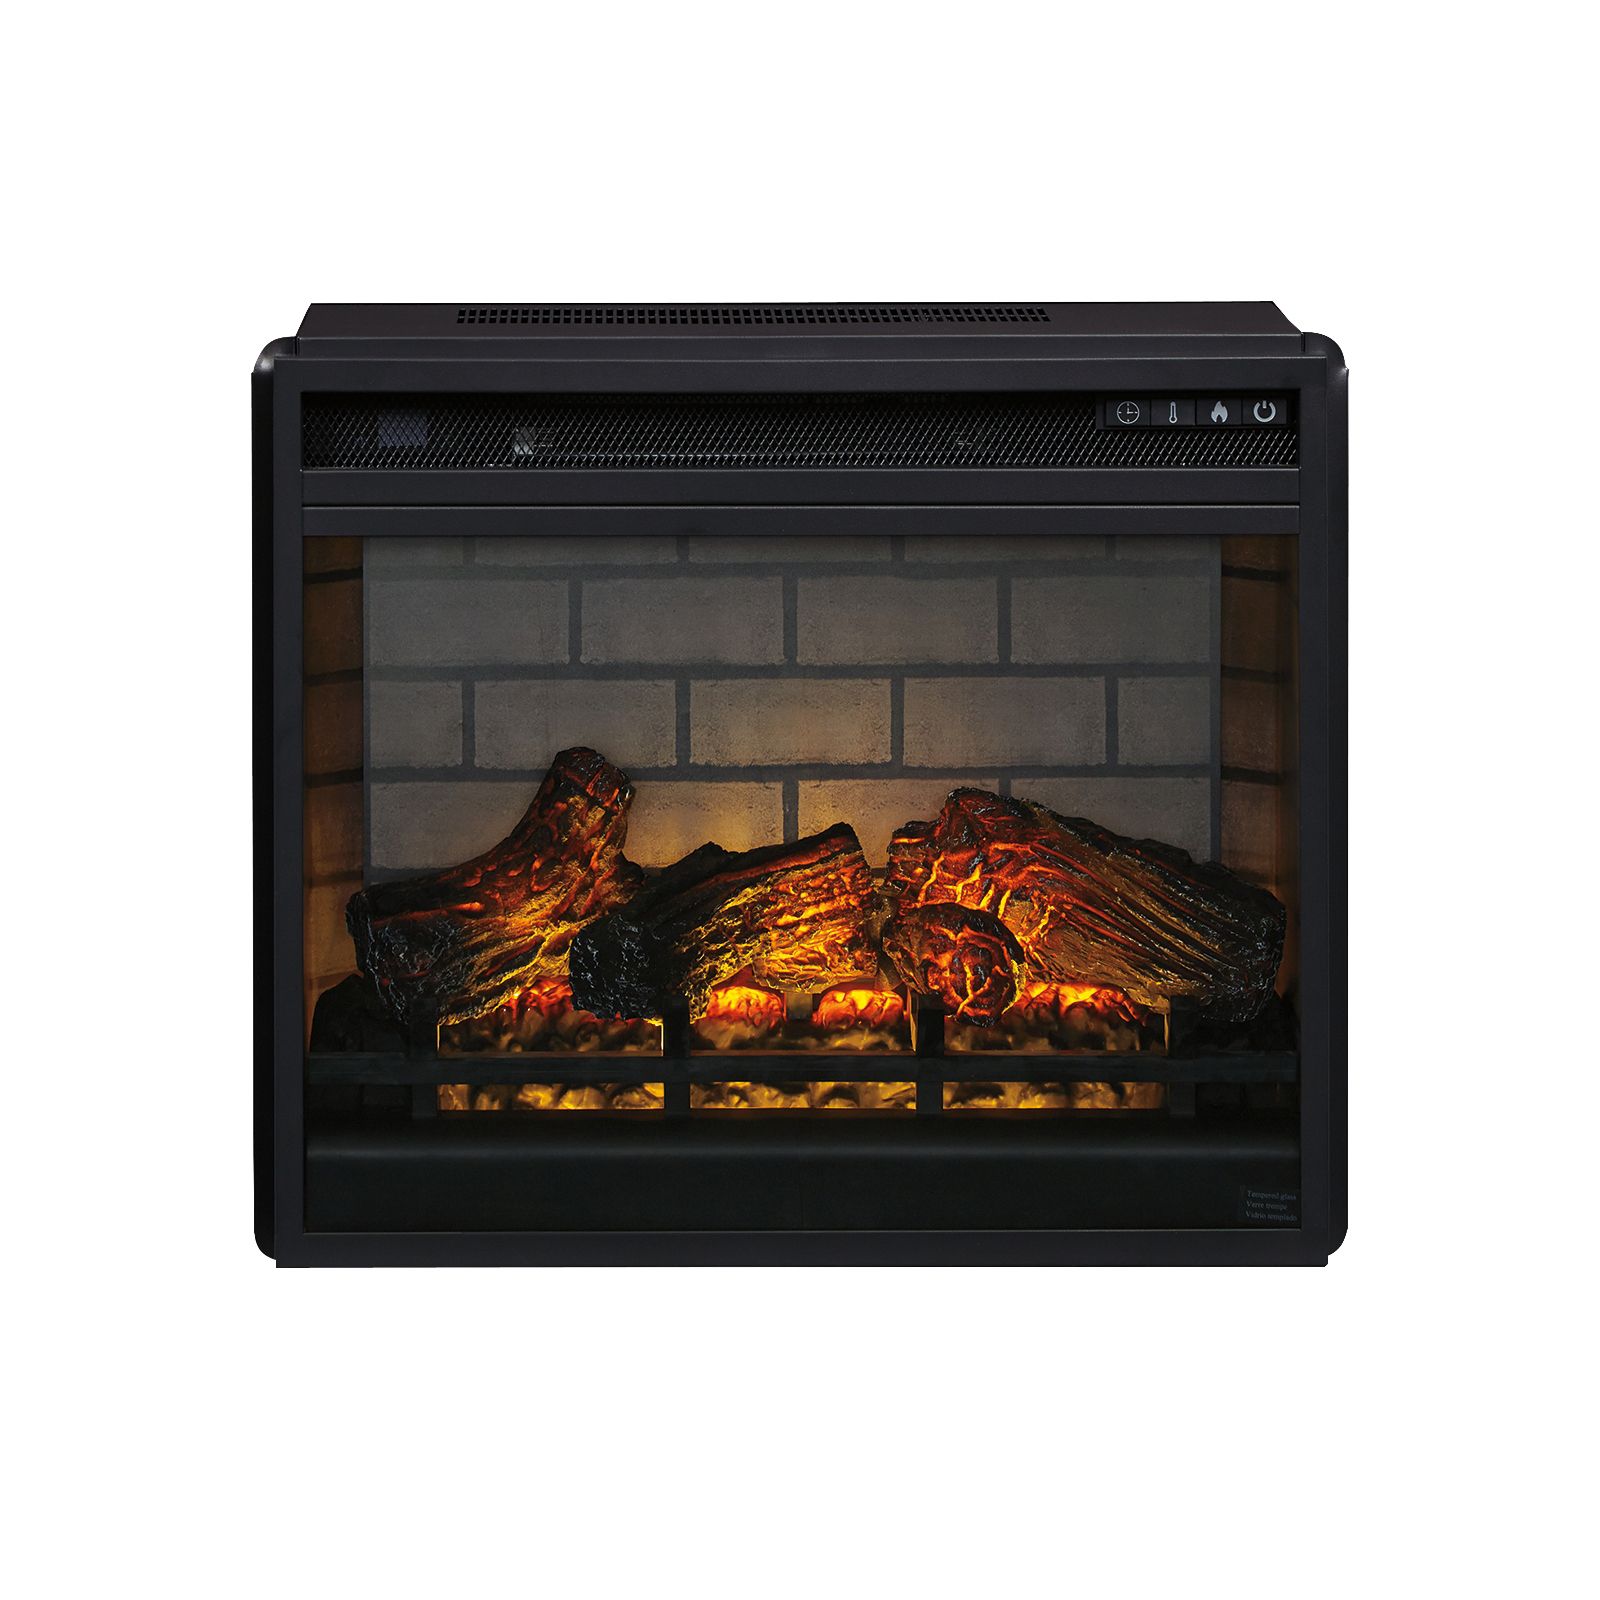 Signature Design by Ashley Entertainment Accessories Electric Infrared Fireplace Insert - Black